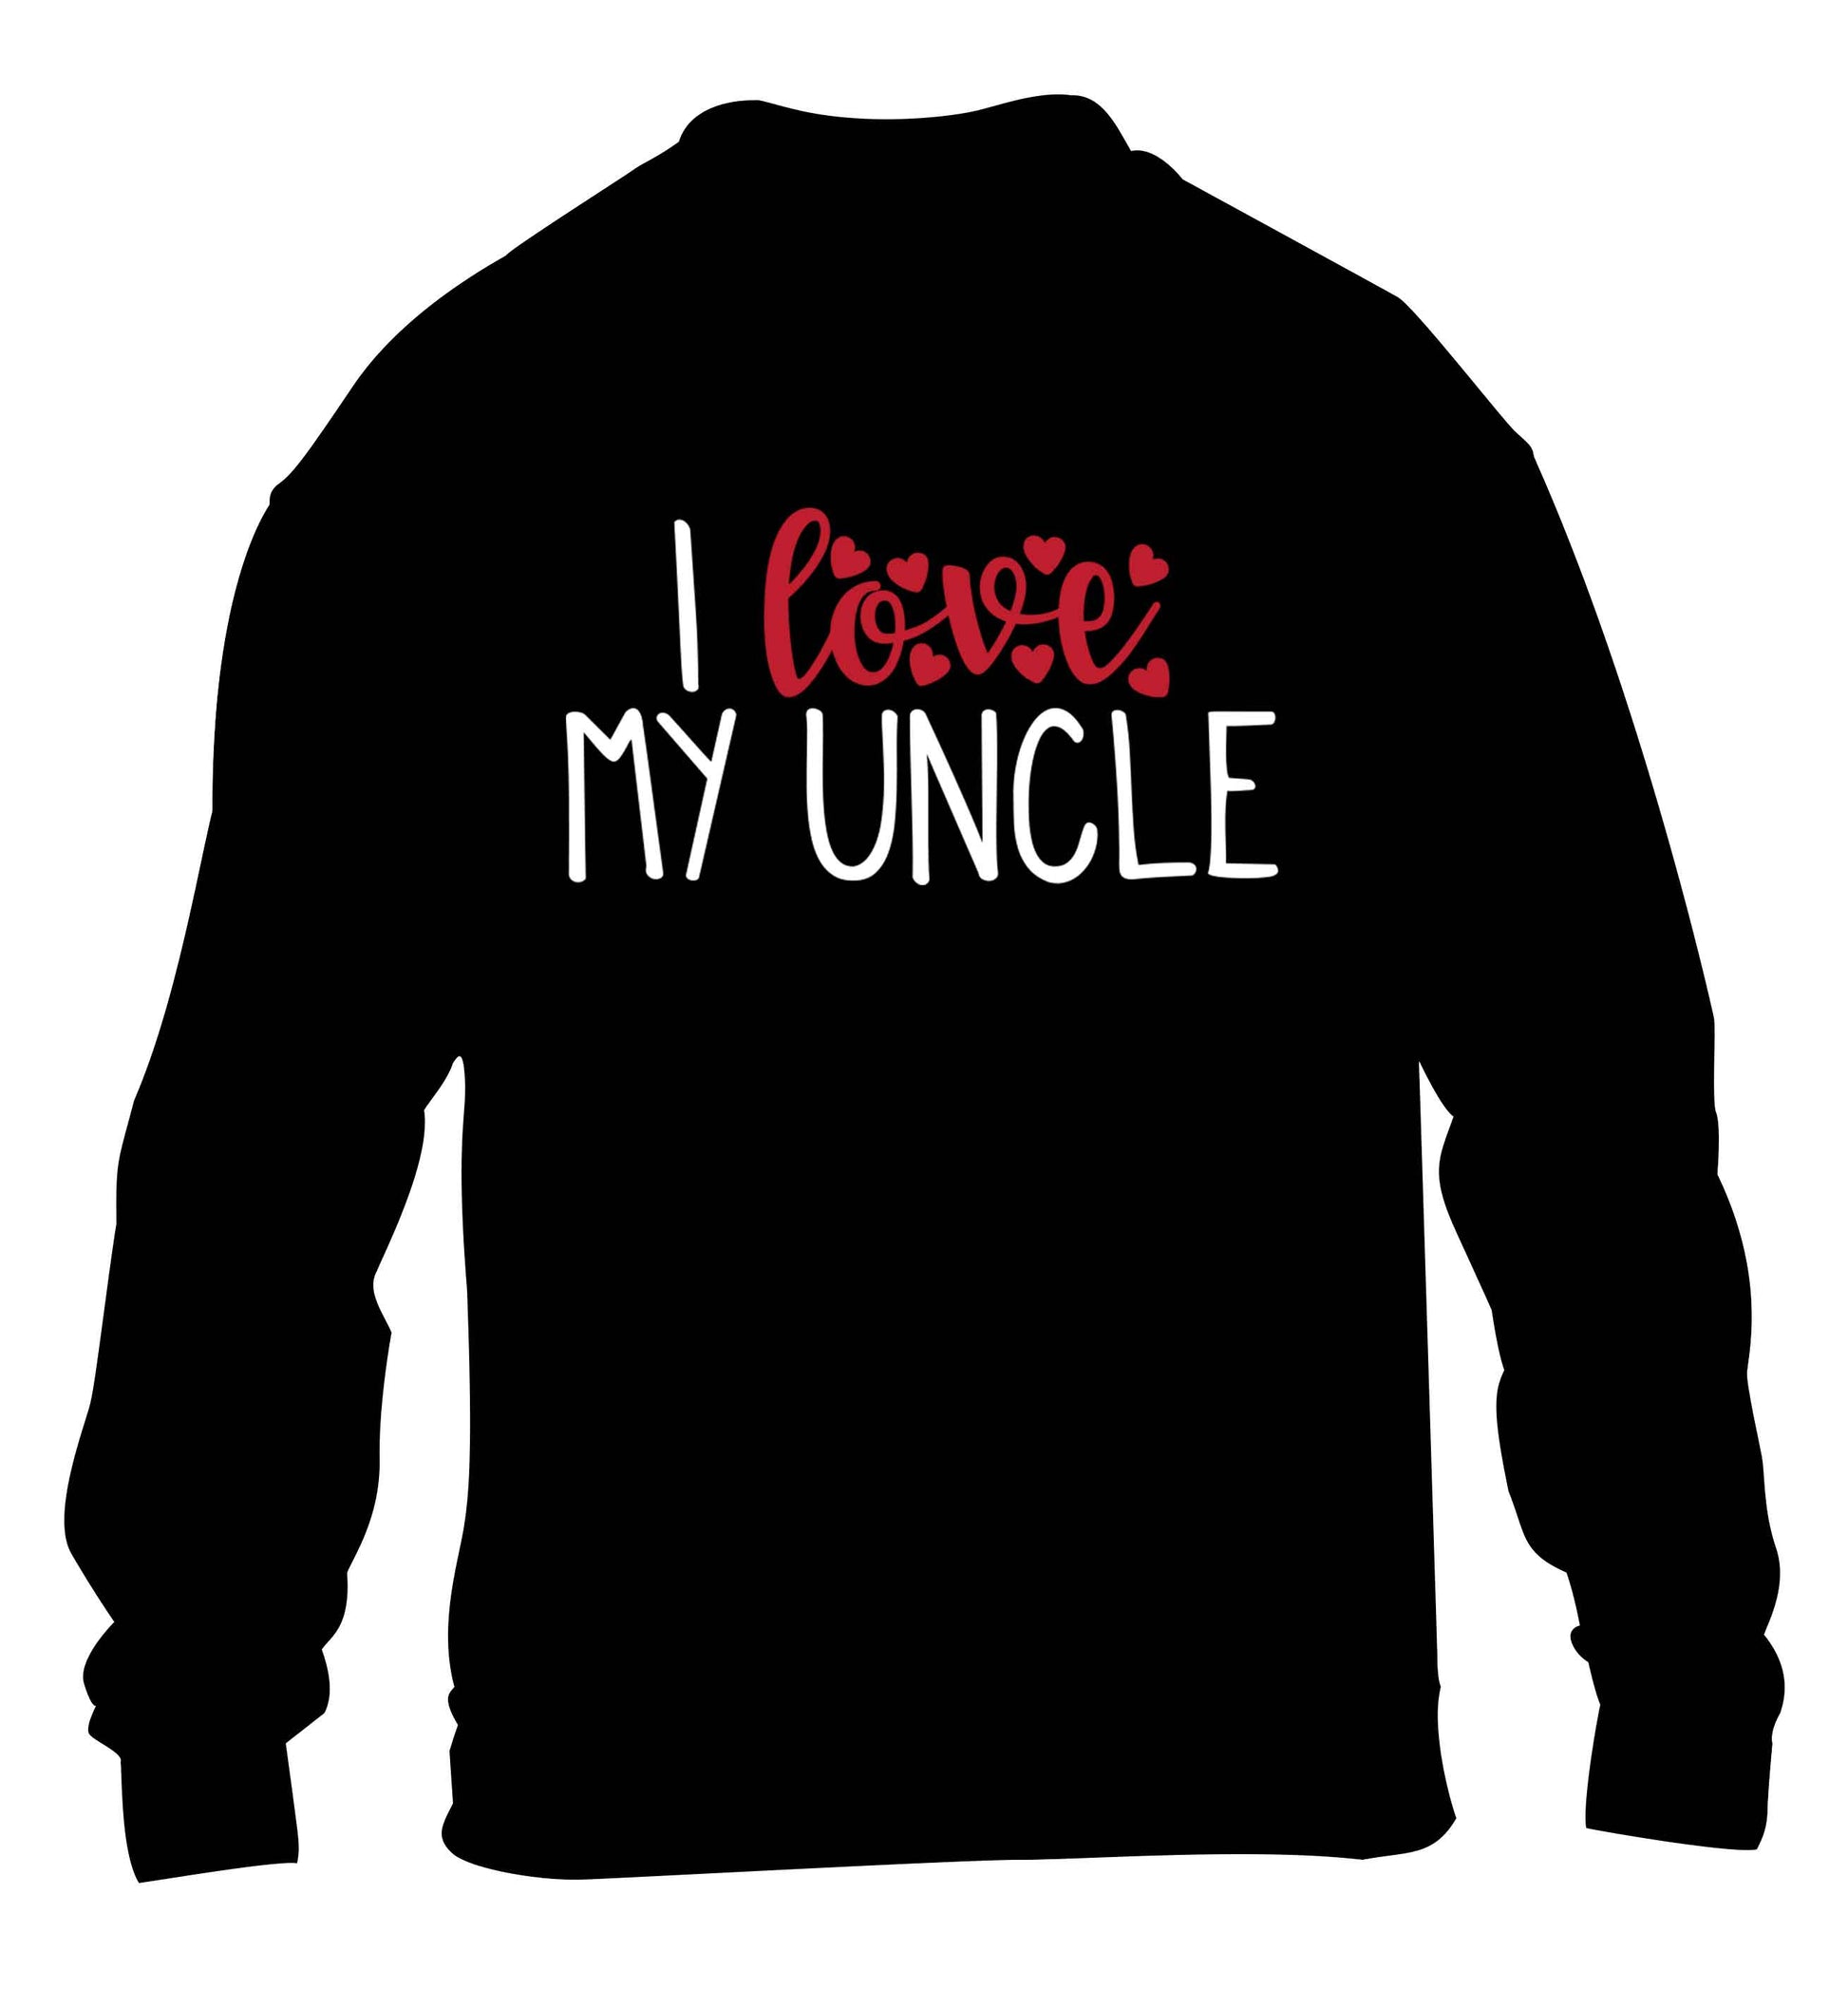 I love my uncle children's black sweater 12-13 Years